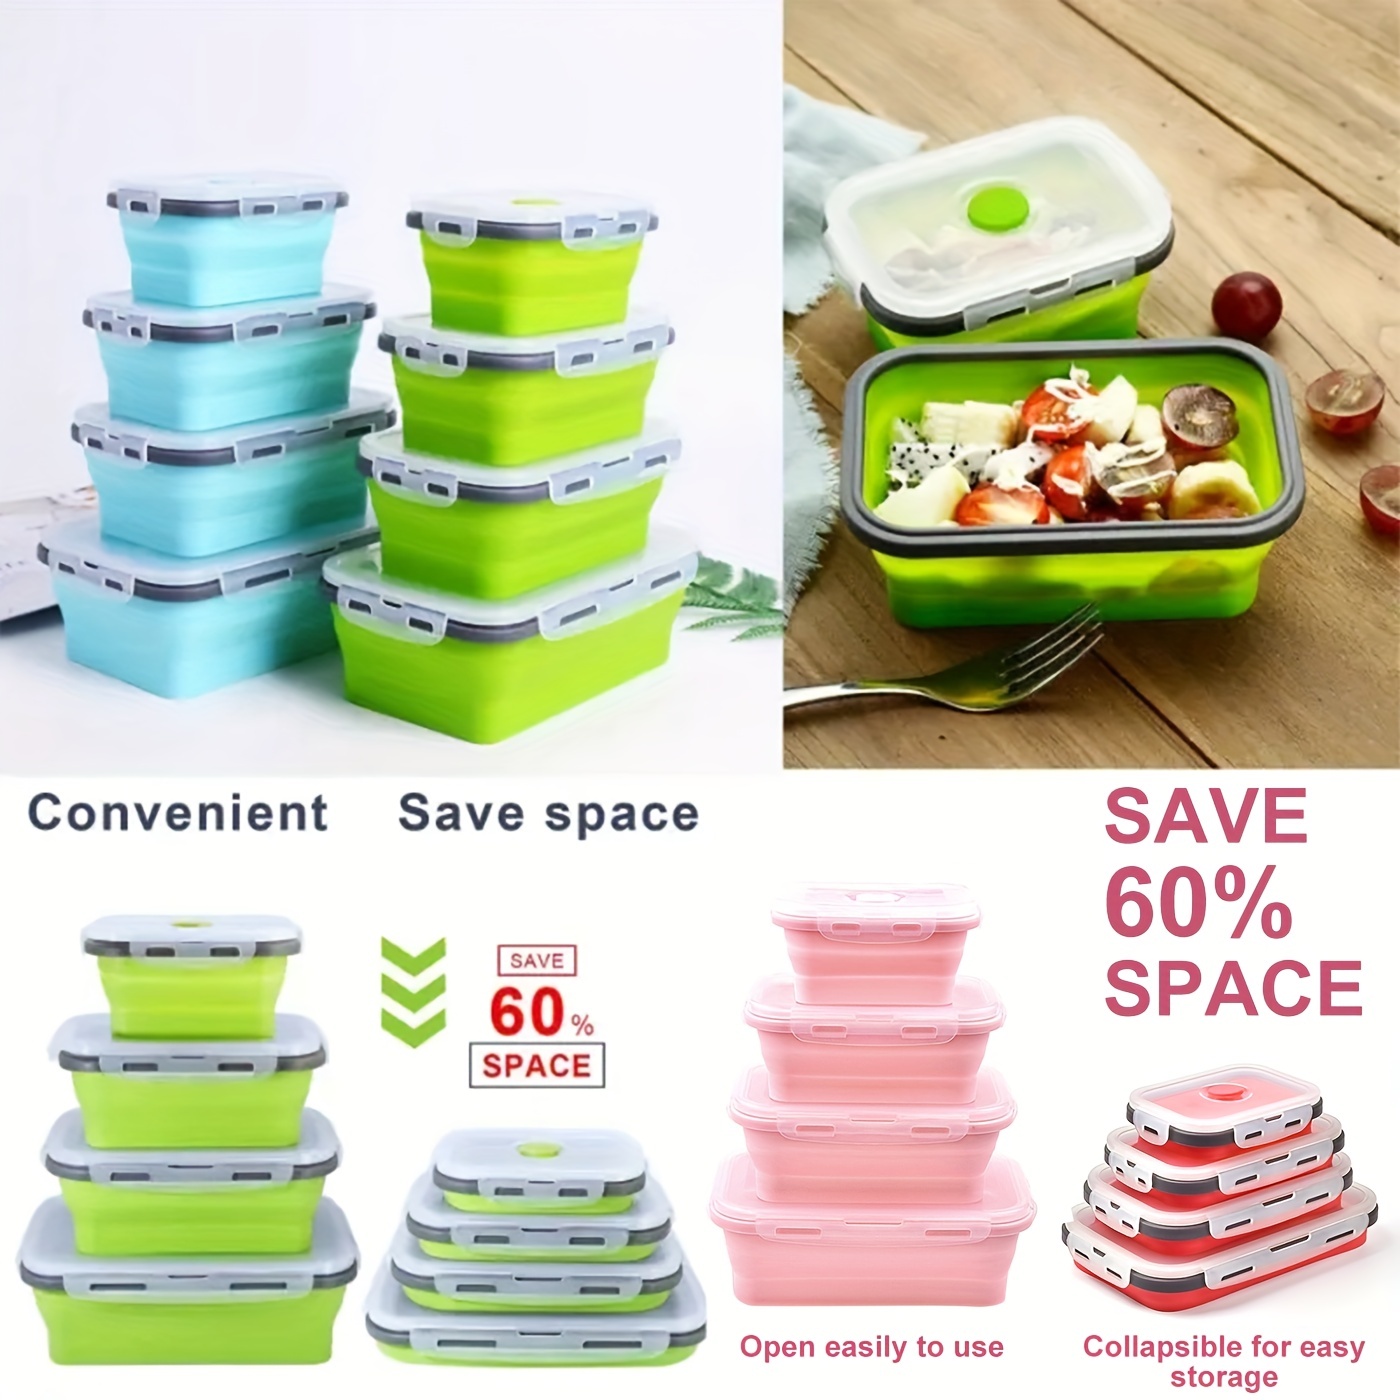 Best Food Storage Containers to Take Camping